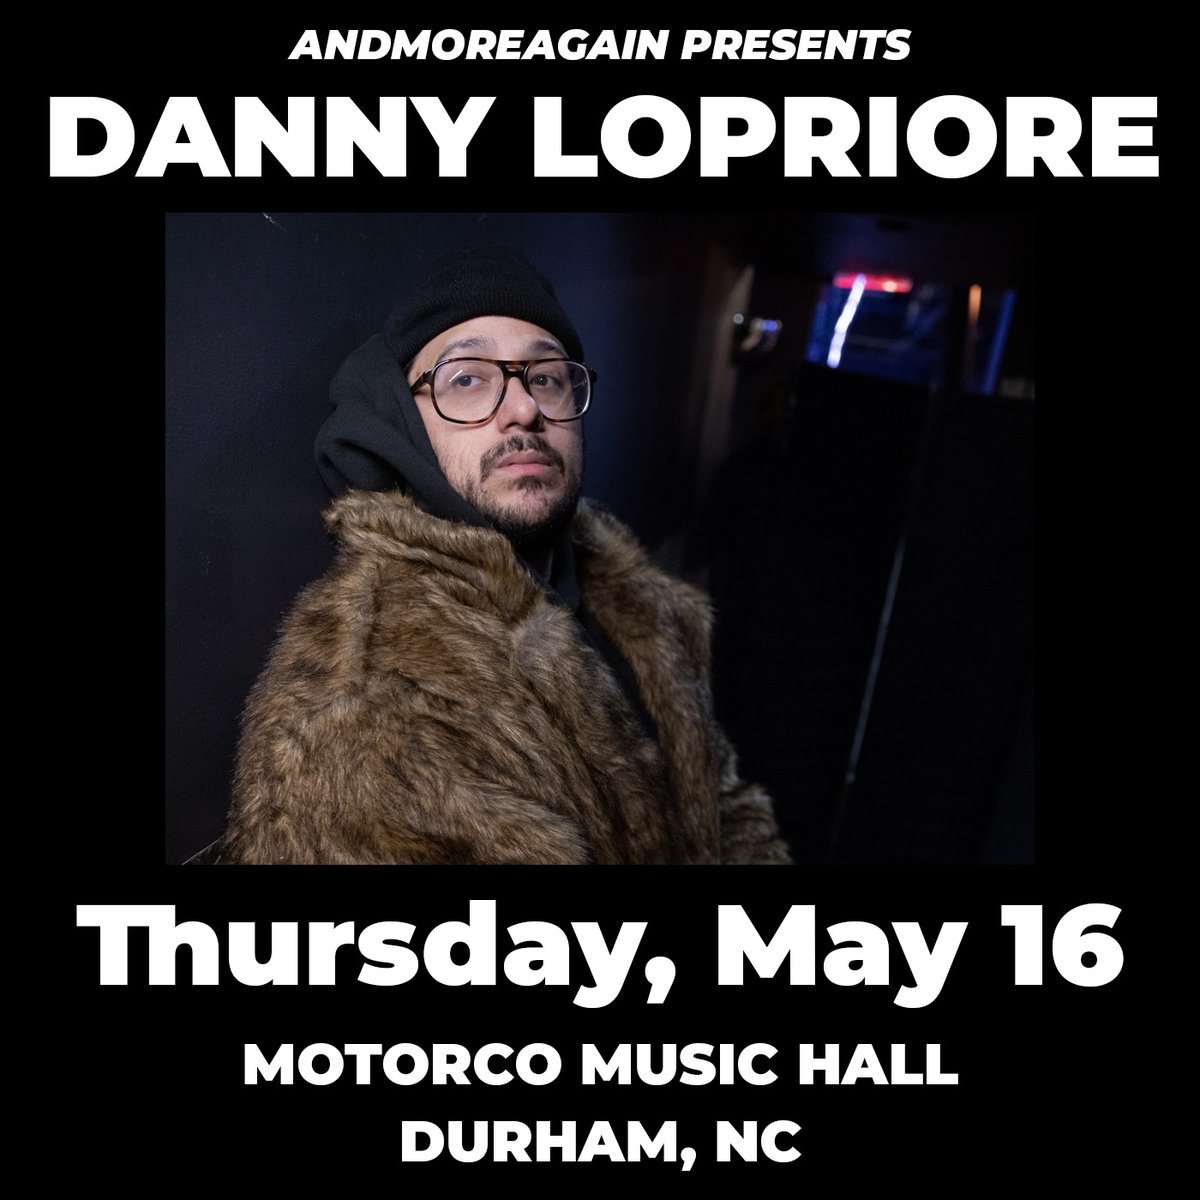 The hilarious @DannyLoPriore performs at @motorcomh on May 16! Tickets are on sale now. found.ee/andDannyLoprio…